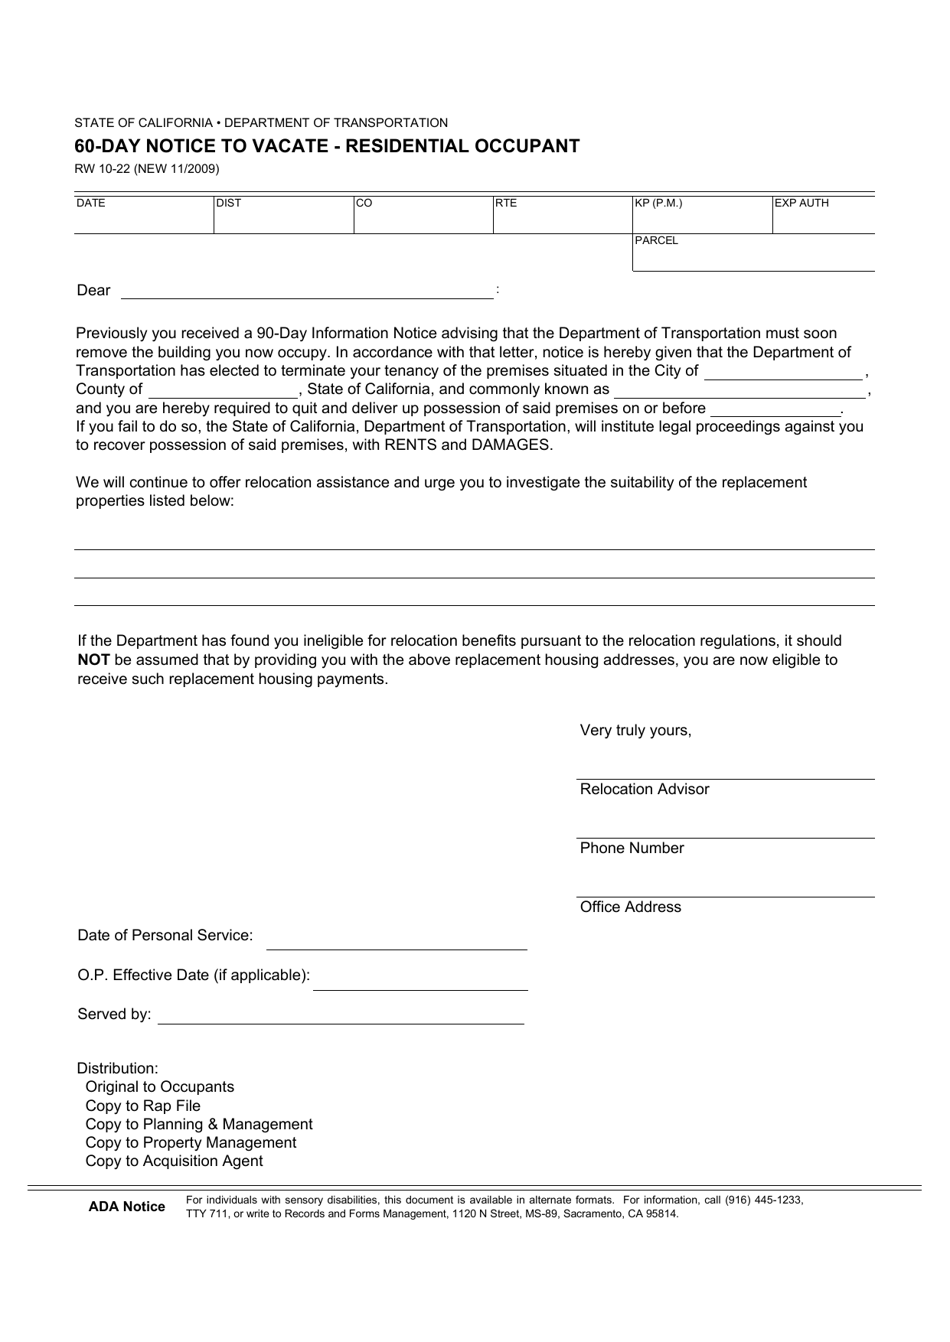 Form RW10-22 60-day Notice to Vacate - Residential Occupant - California, Page 1